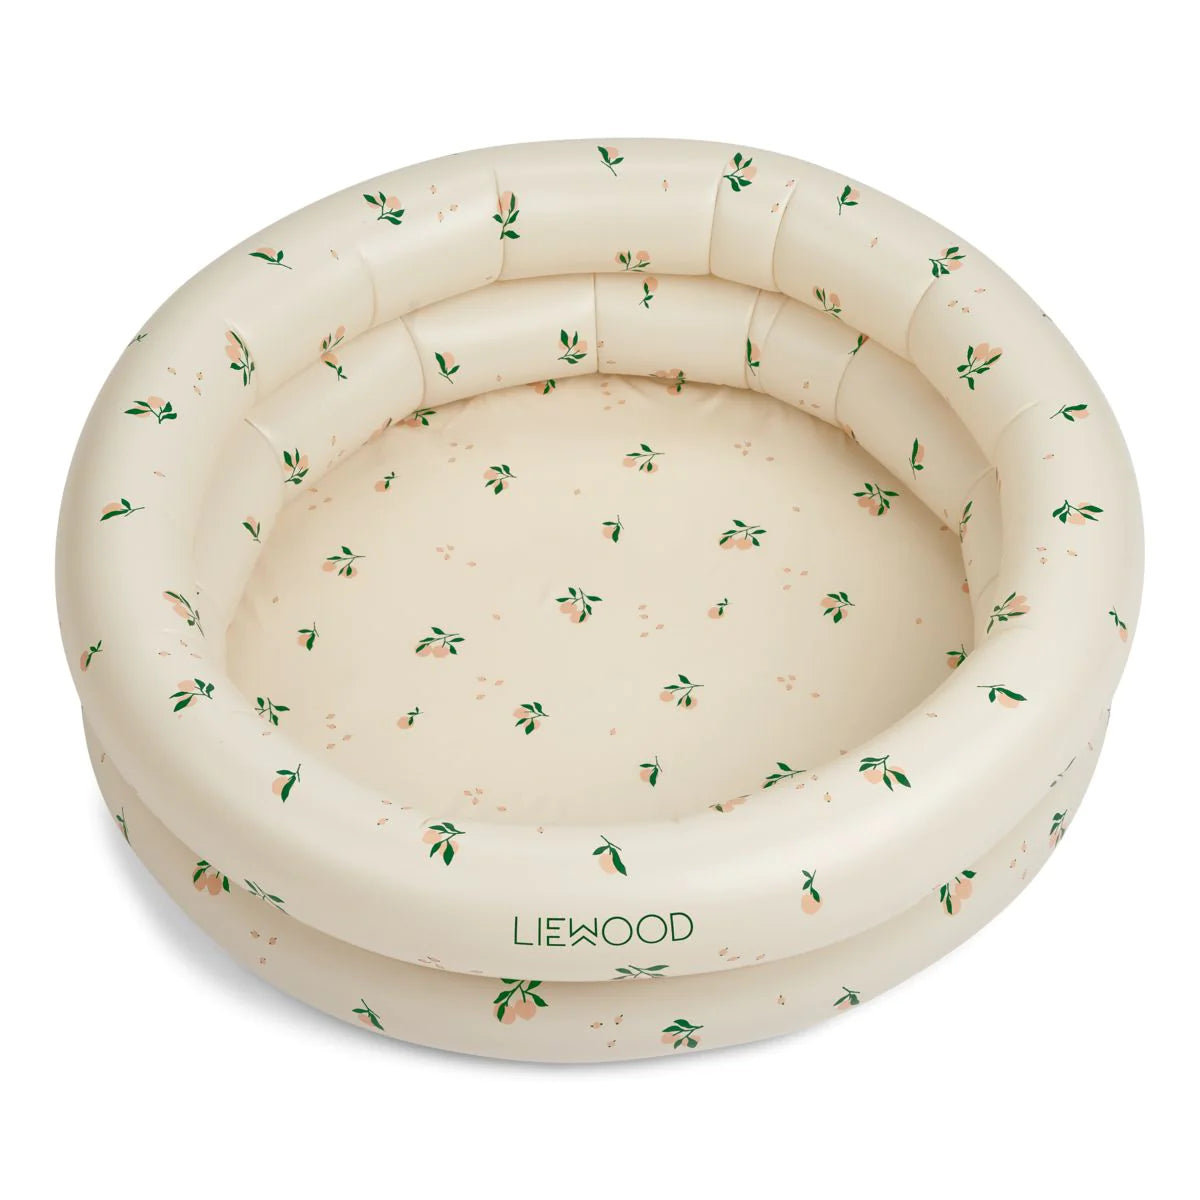 Piscina Infantil inflable Leonore Peach Sea Liewood